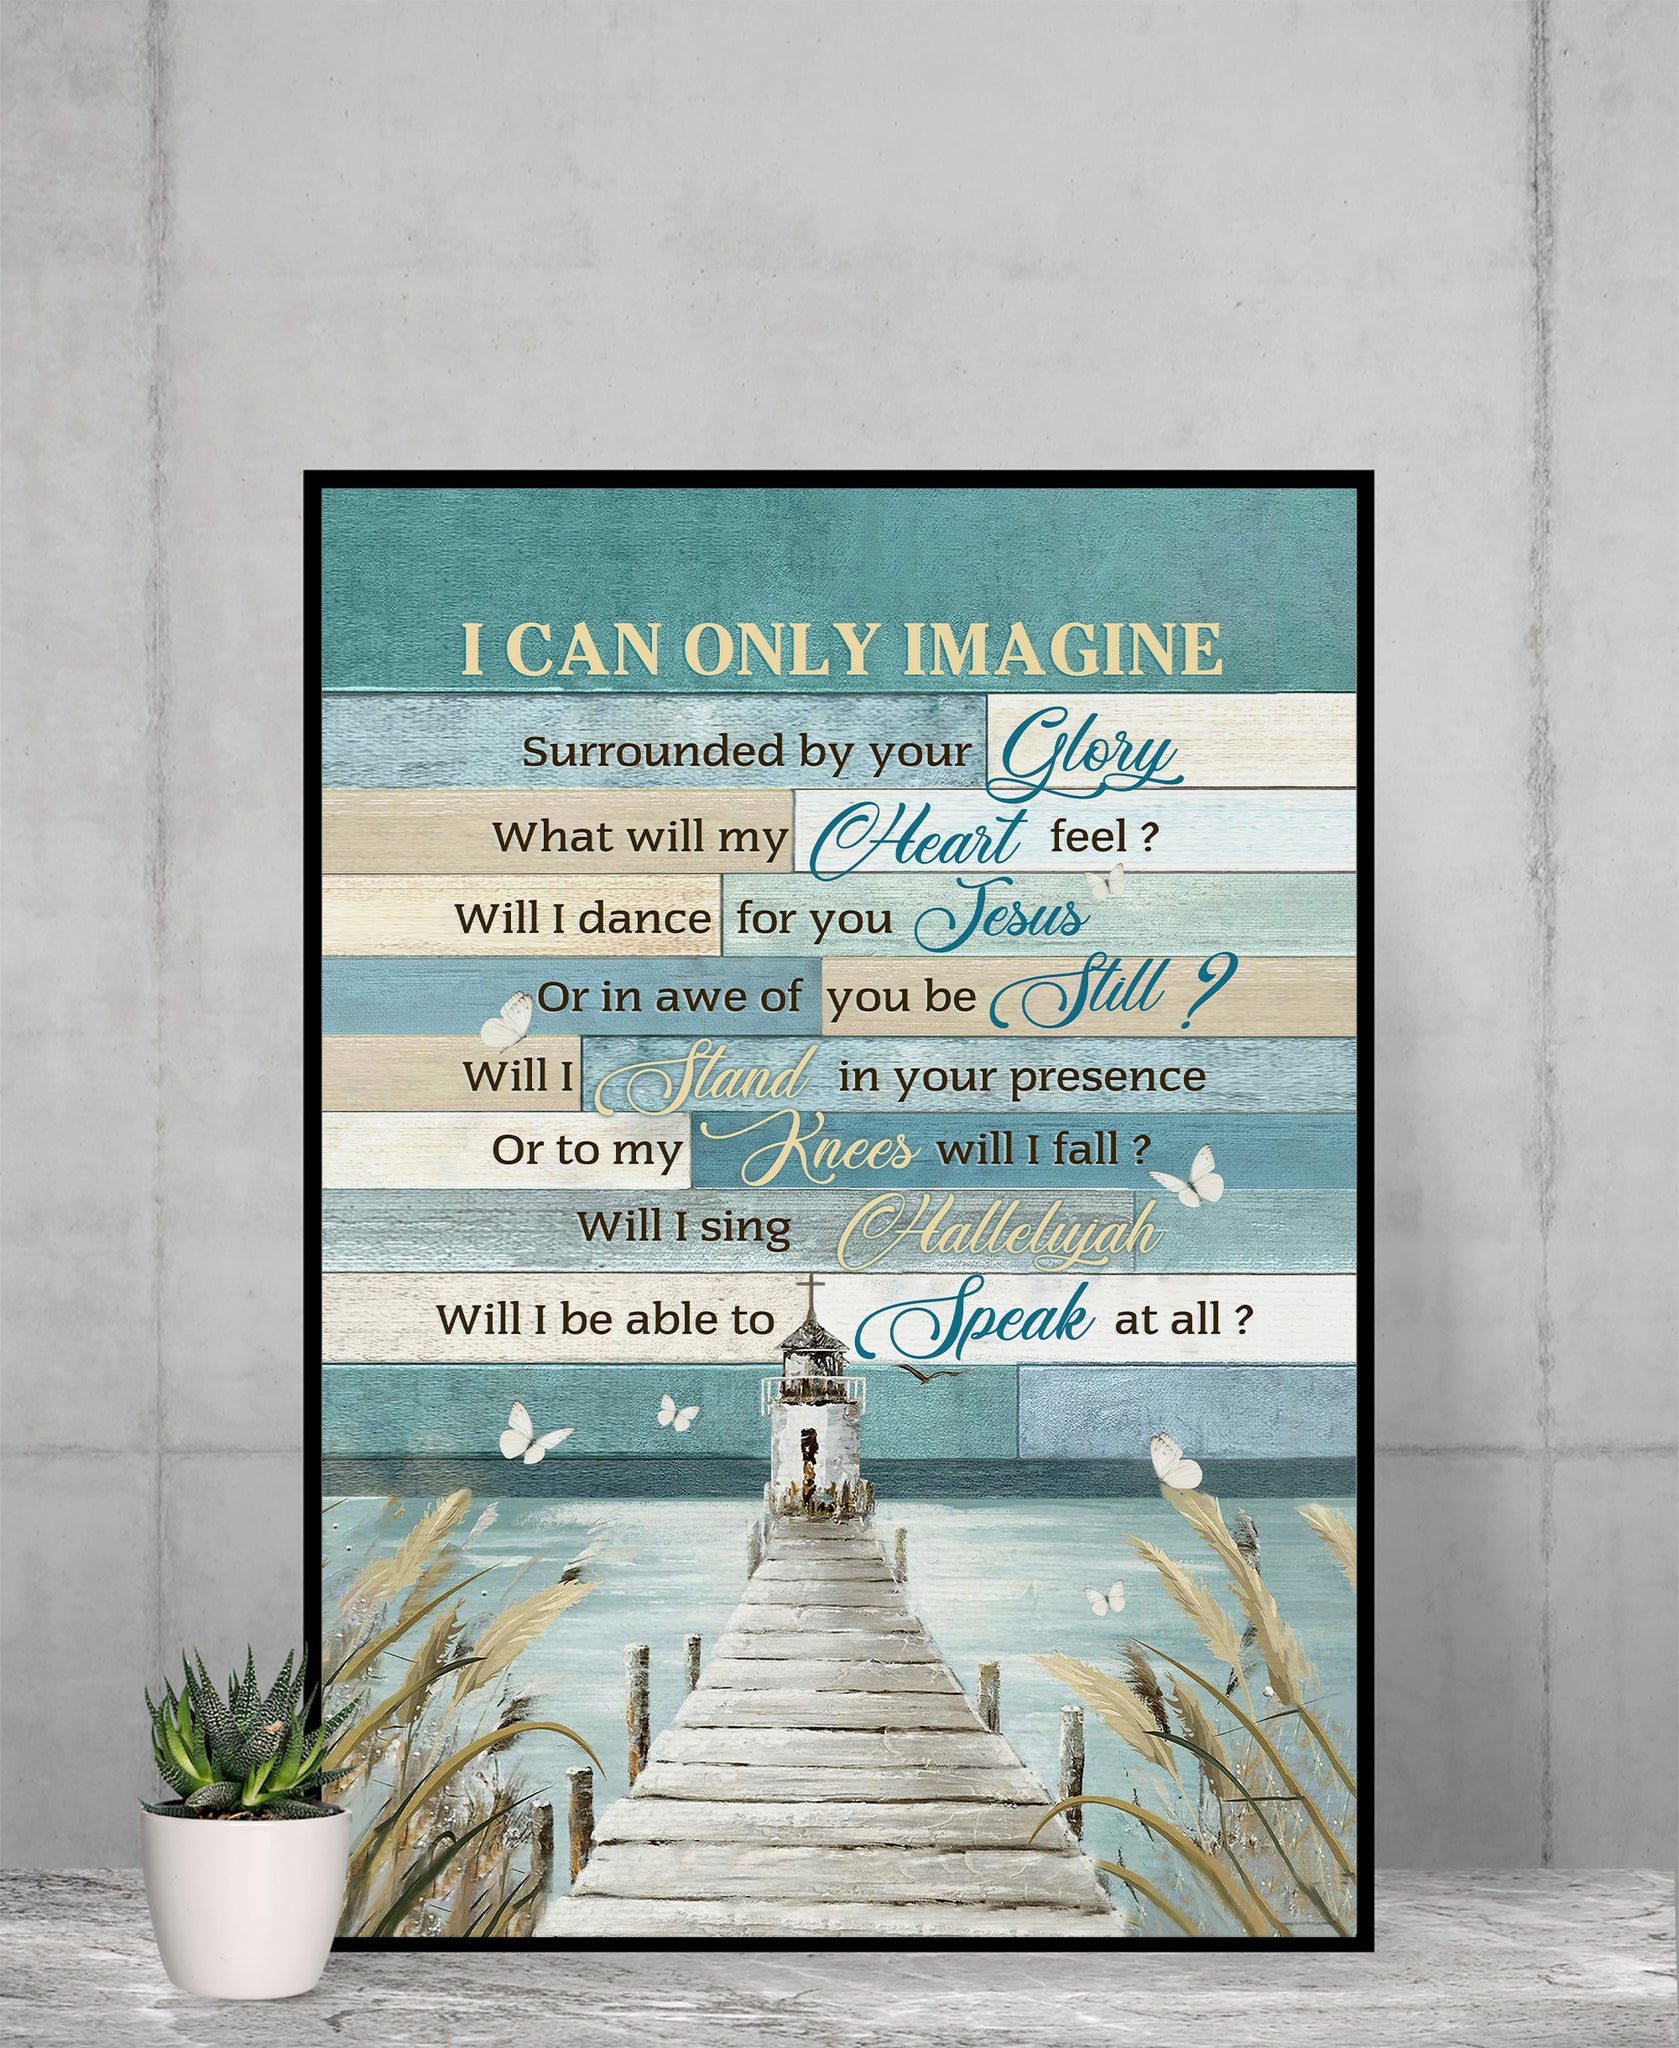 Poster Wall, I Can Only Image Poster, Butterfly Images, Lighthouse, Jesus Christ, Jesus Cross, Quotes About Jesus, Jesus Art, Christmas Gifts